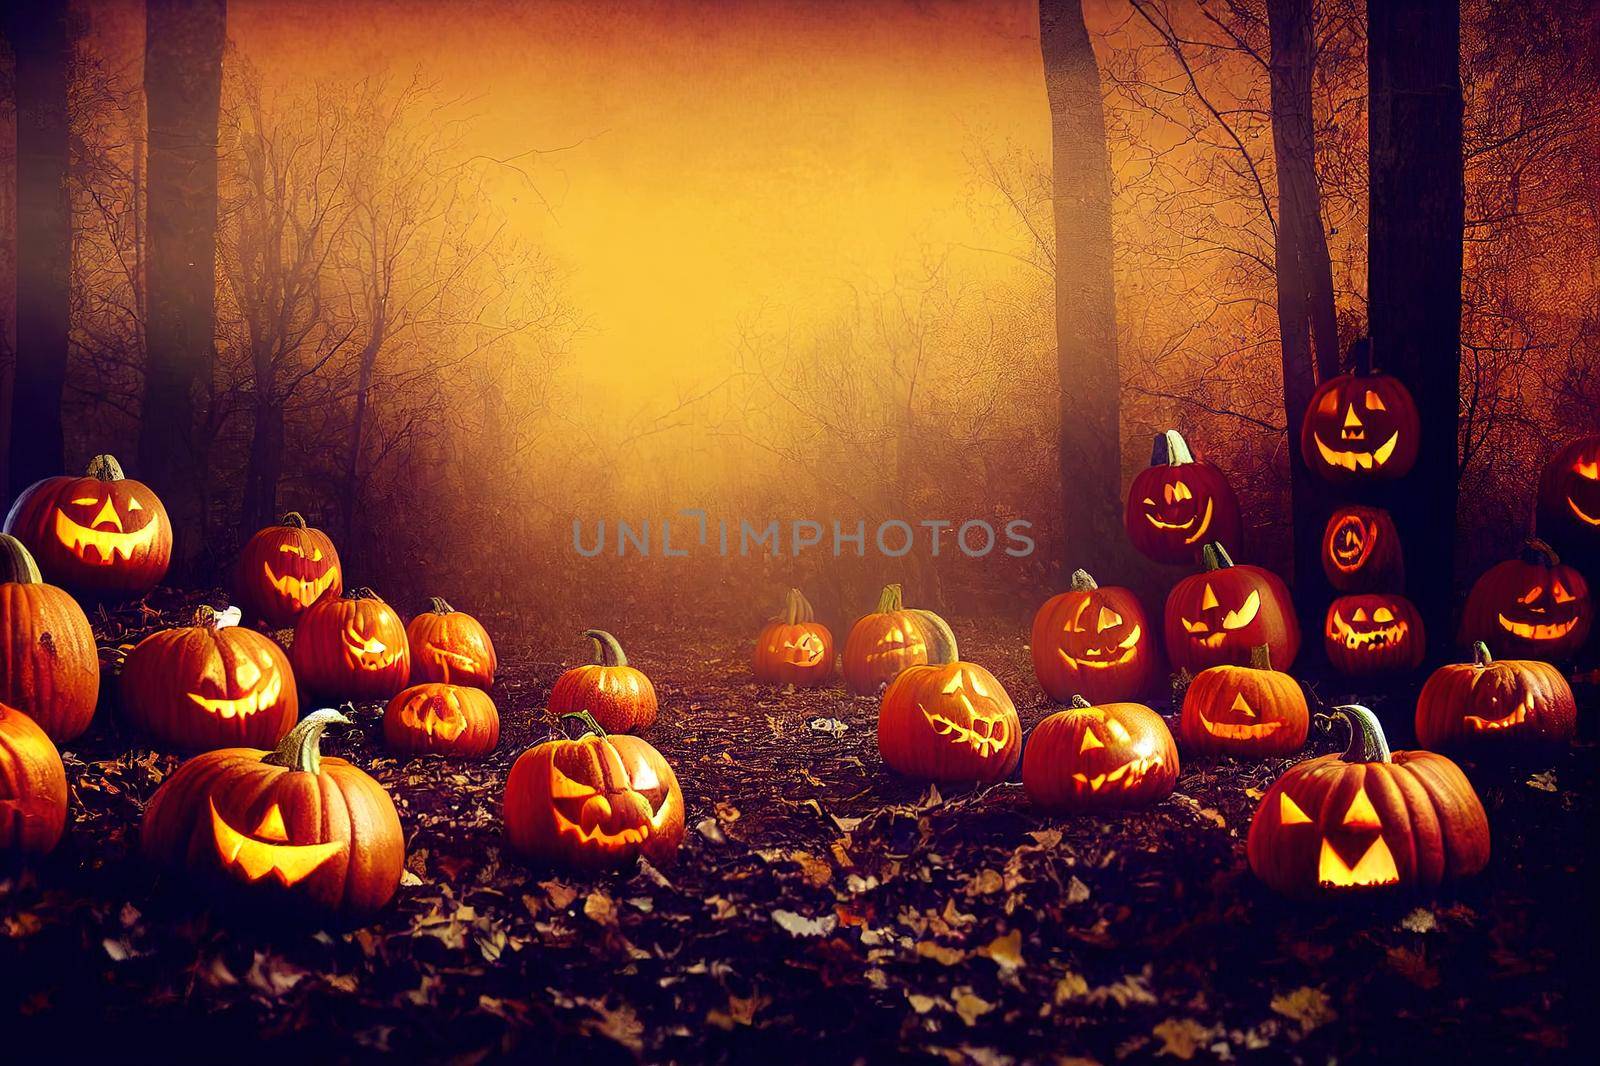 Halloween spooky background, scary pumpkins scene. Scary creepy forest by 2ragon